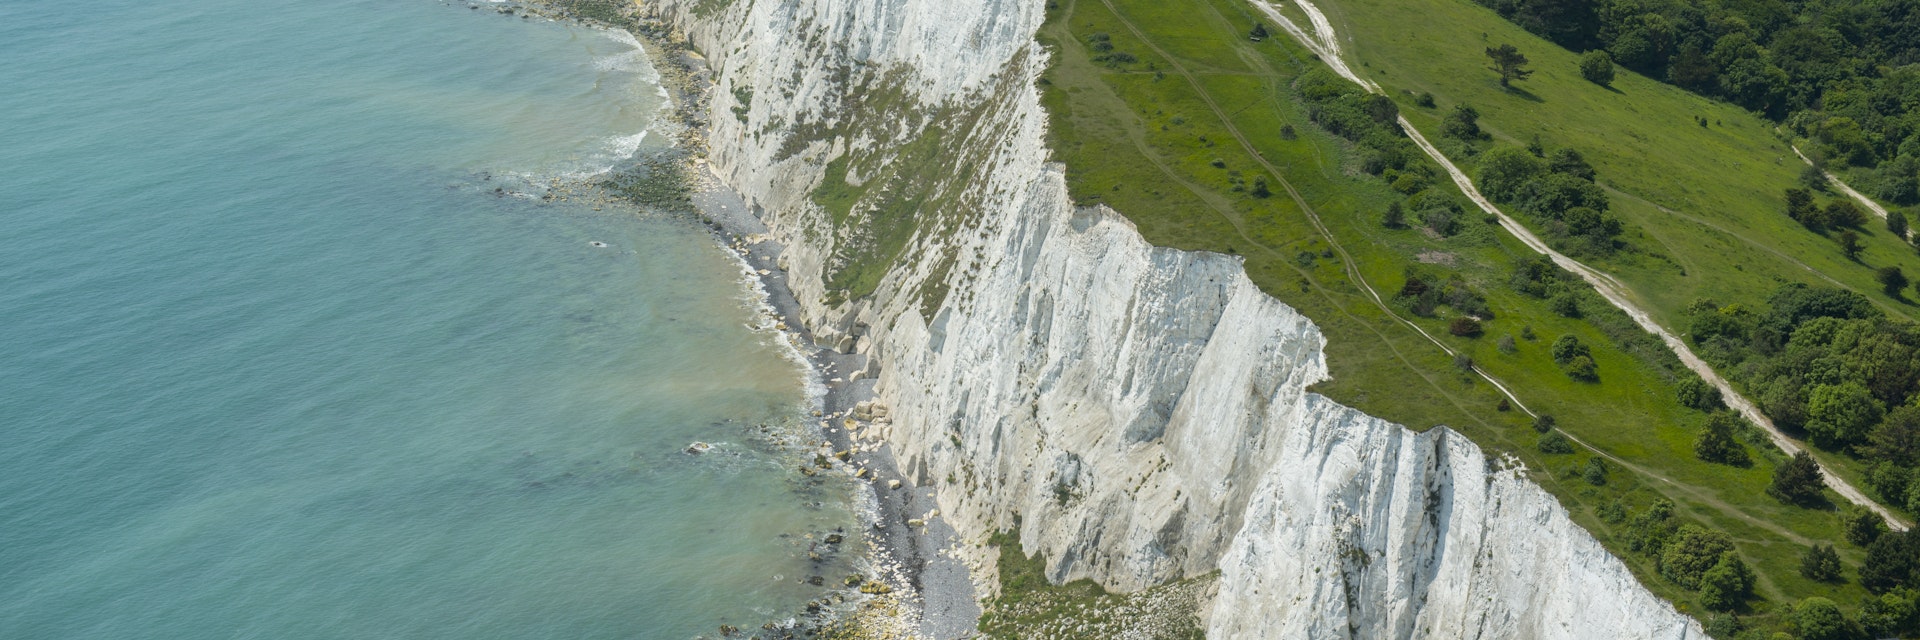 The White Cliffs of Dover, East Sussex, England